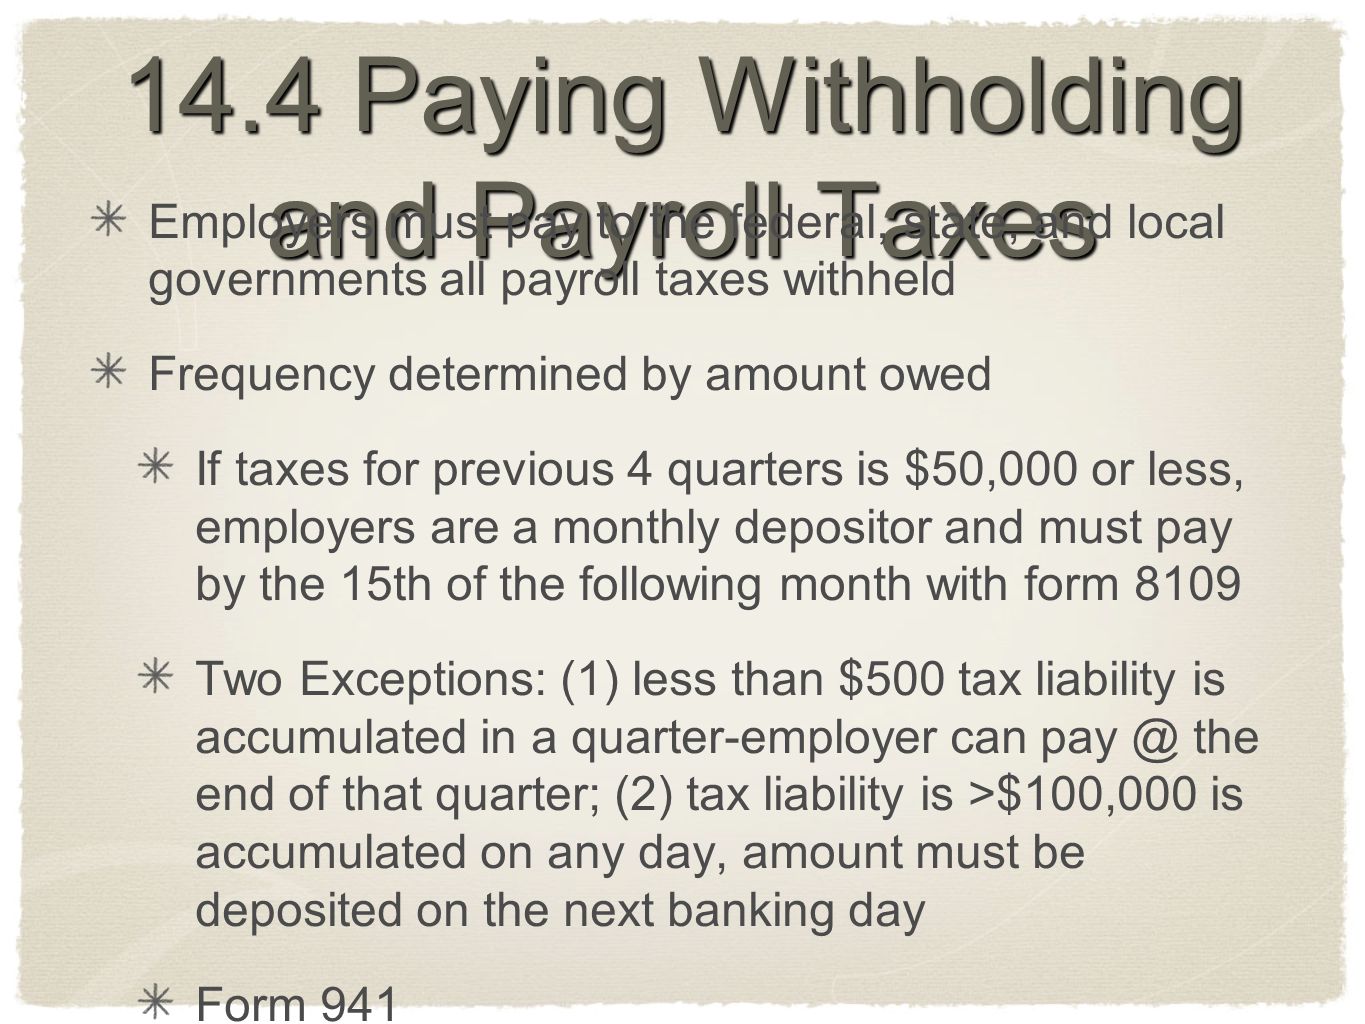 14.4 Paying Withholding and Payroll Taxes